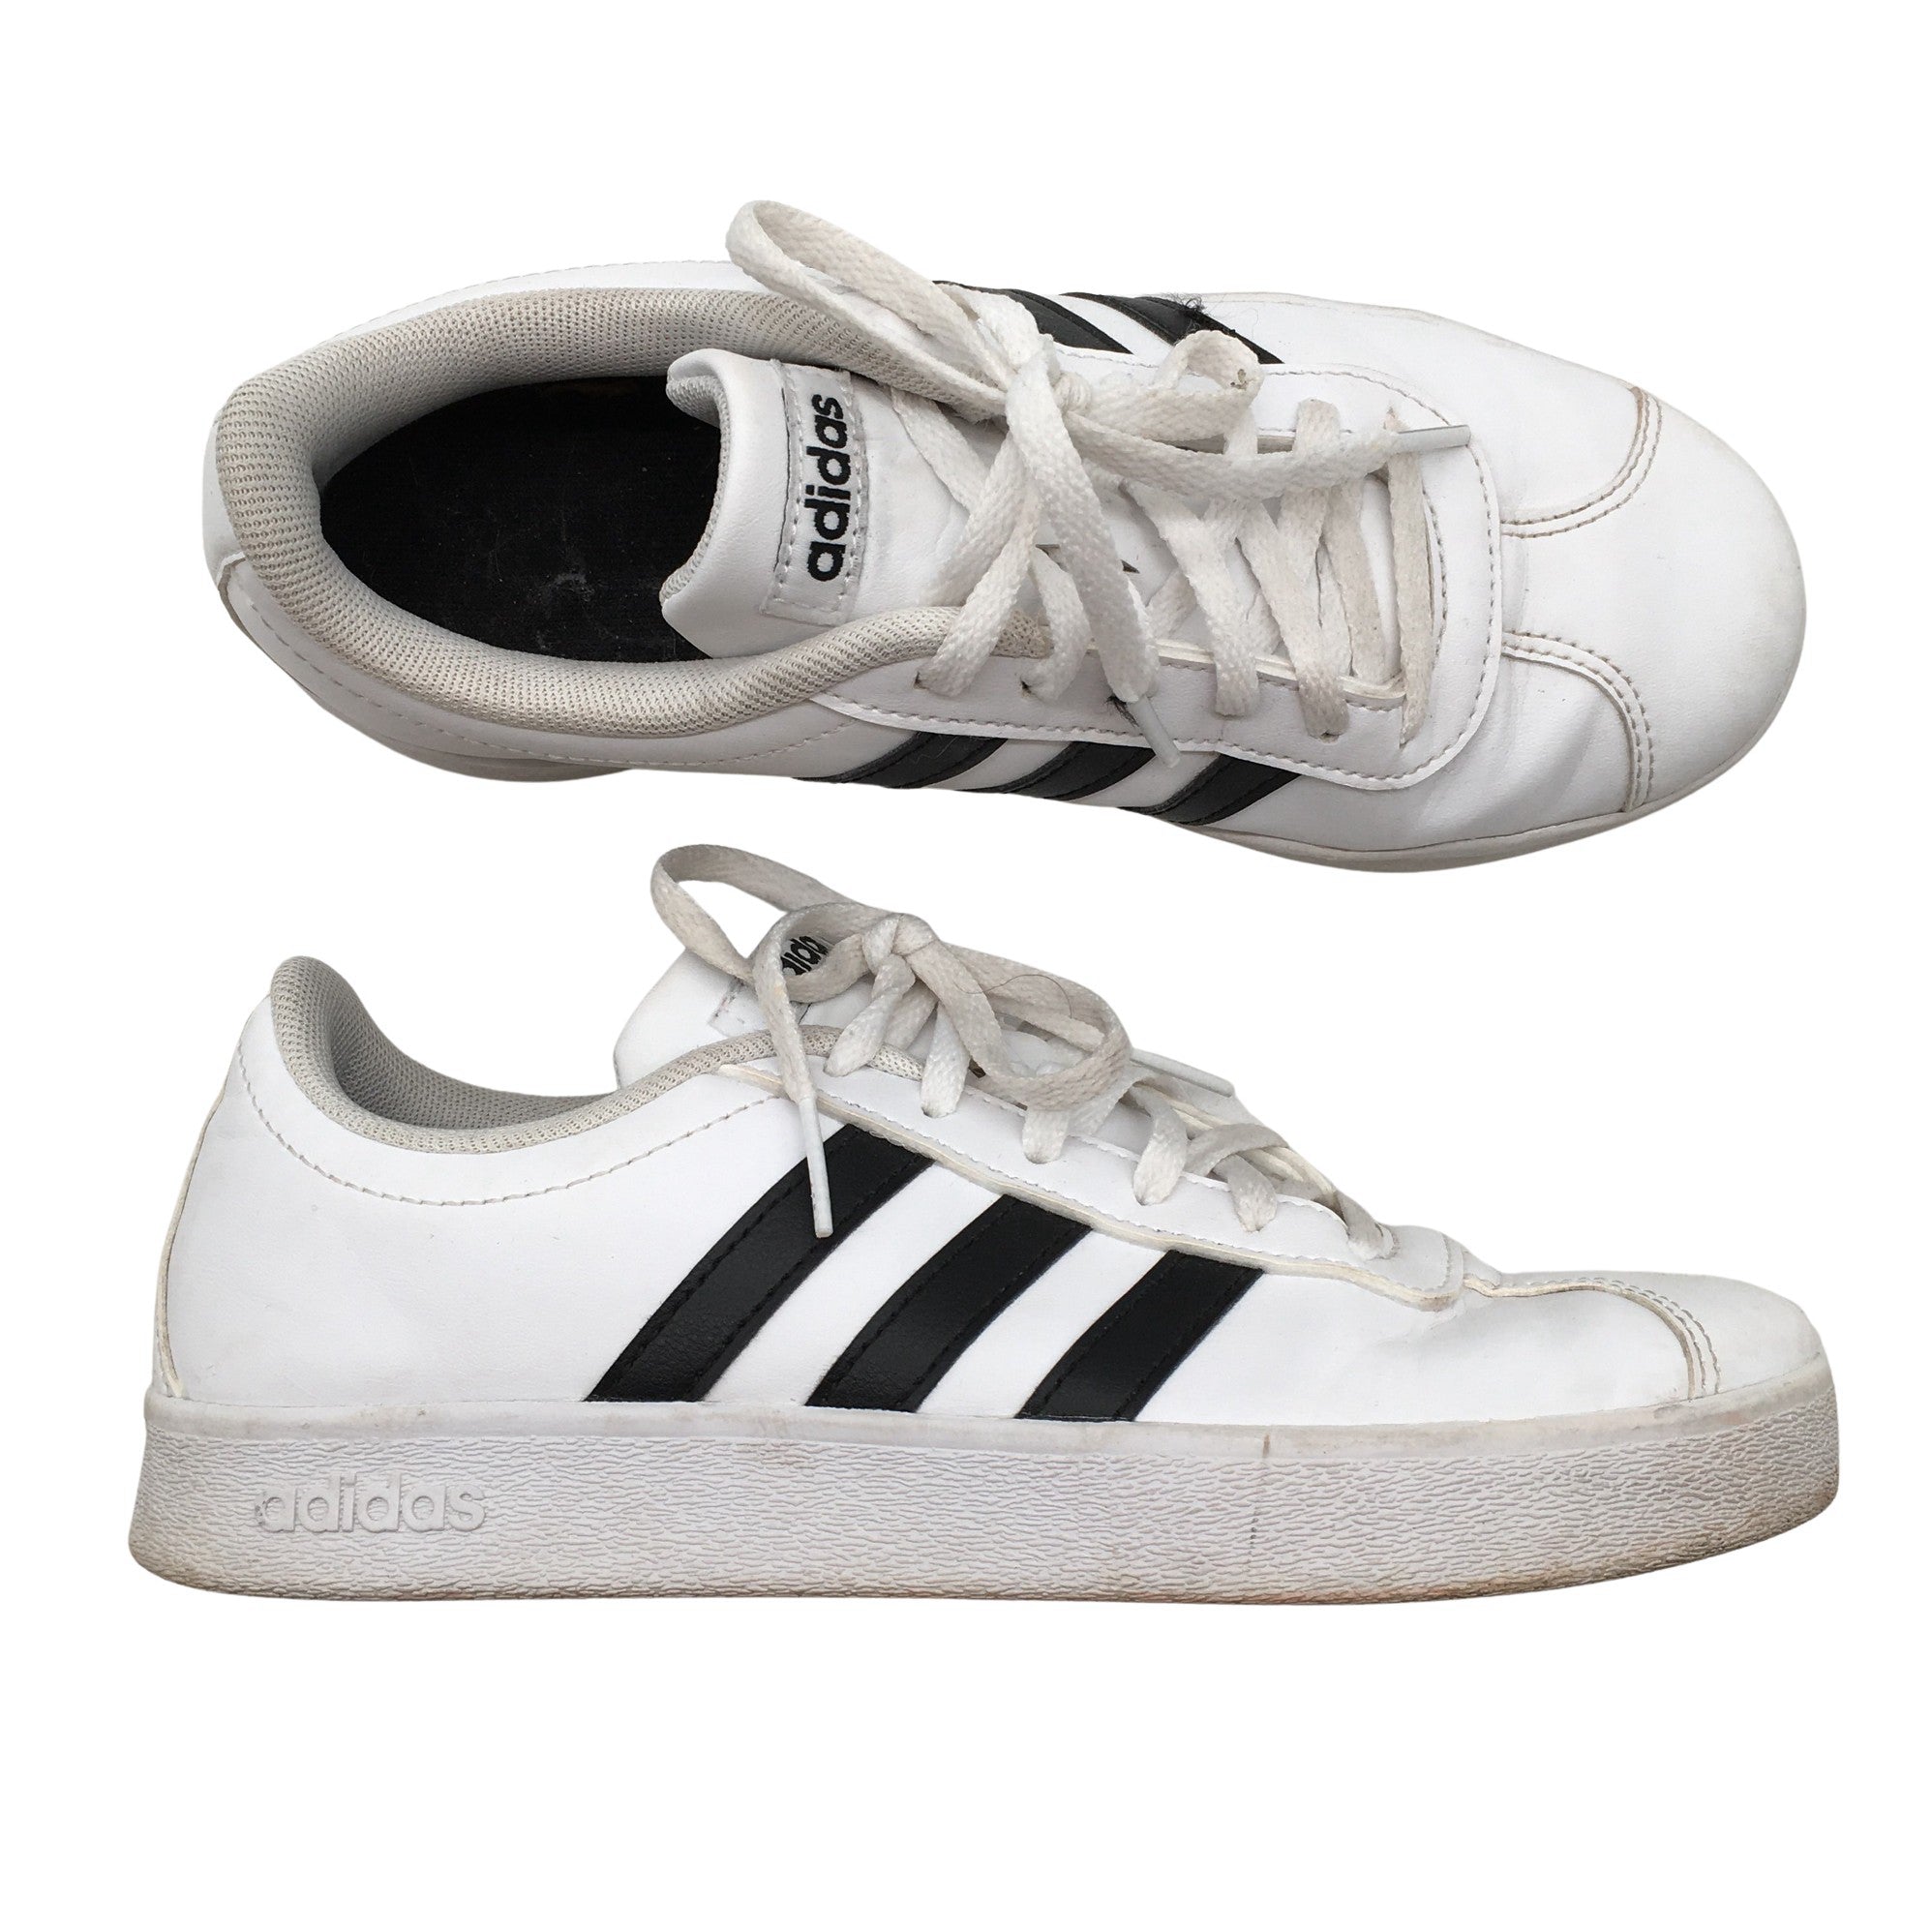 Women's Adidas Casual sneakers, size 36 (White)